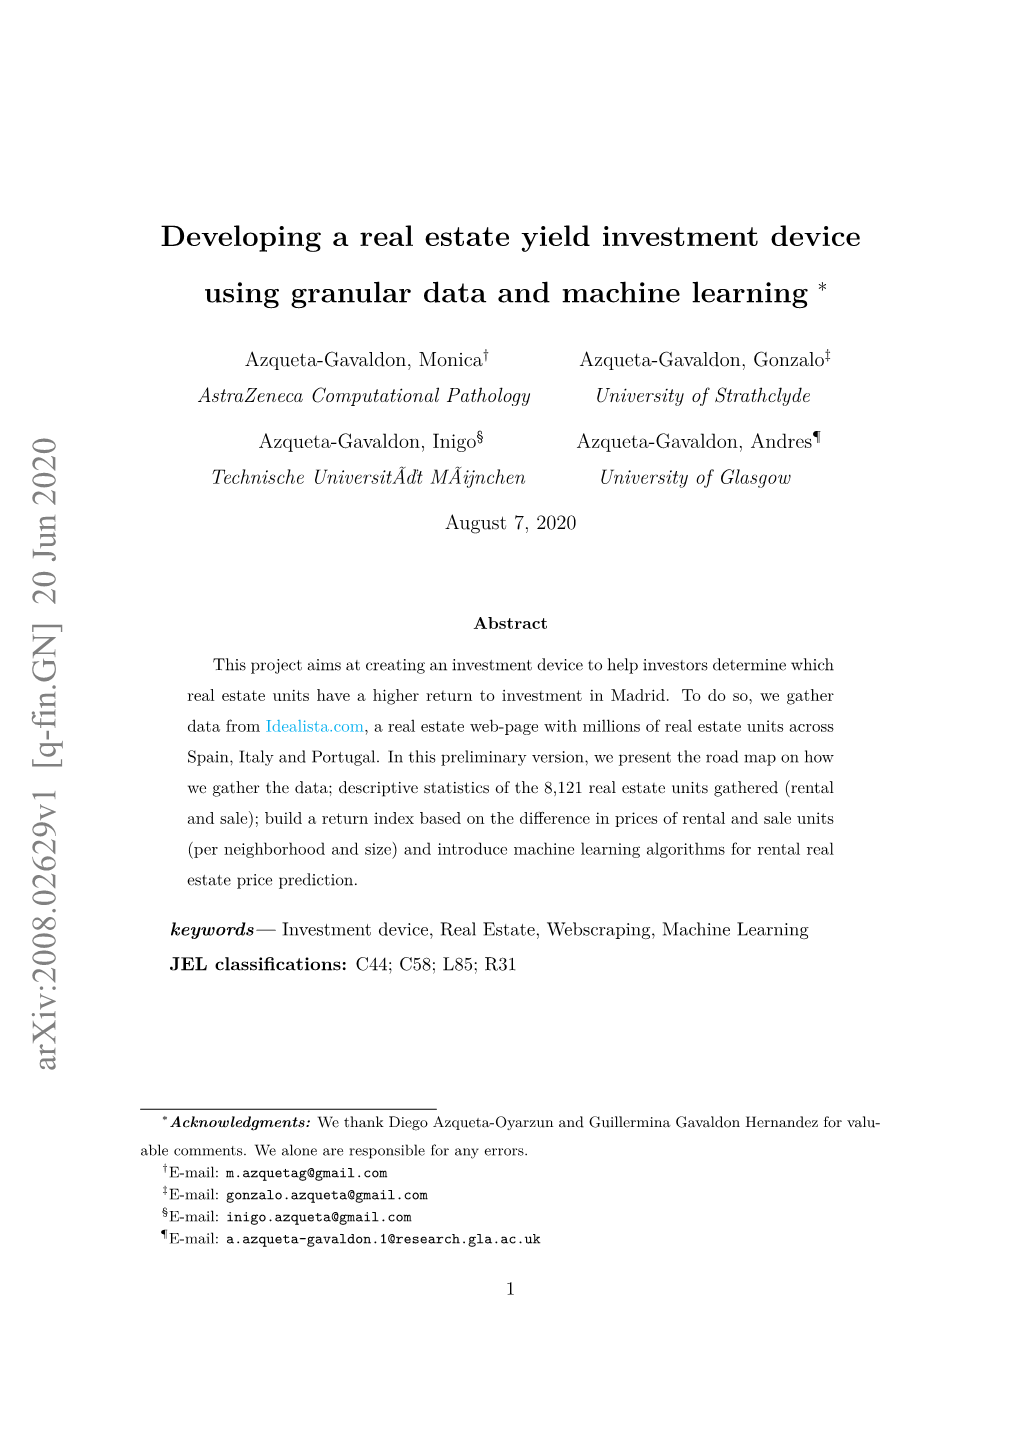 Developing a Real Estate Yield Investment Deviceusing Granular